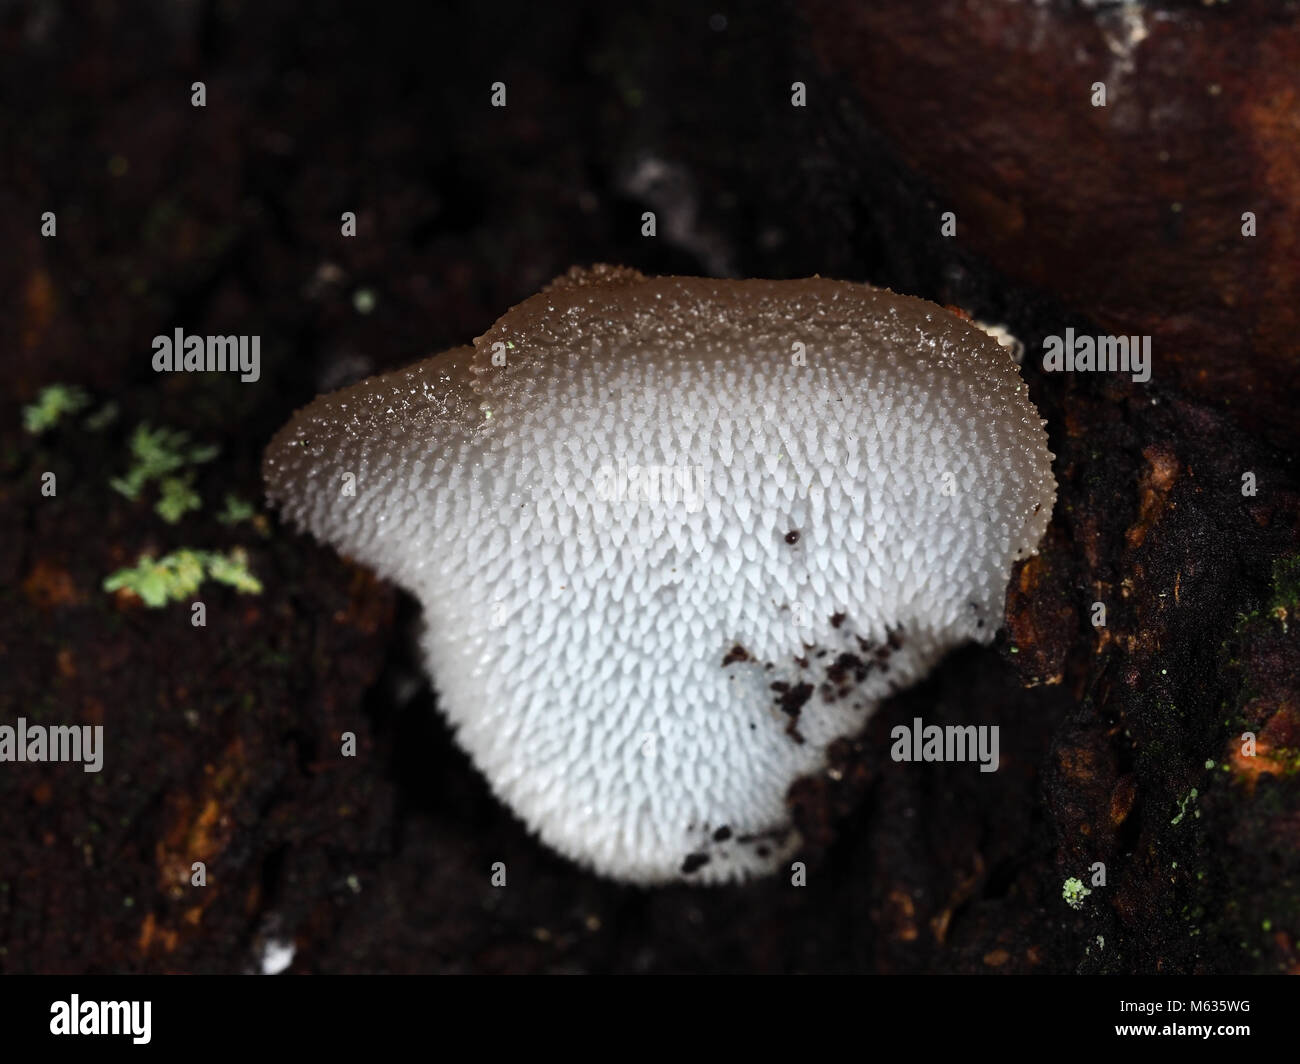 Pseudohydnum gelatinosum (toothed jelly fungus) mushroom growing in a Pacific Northwest forest, close-up view Stock Photo